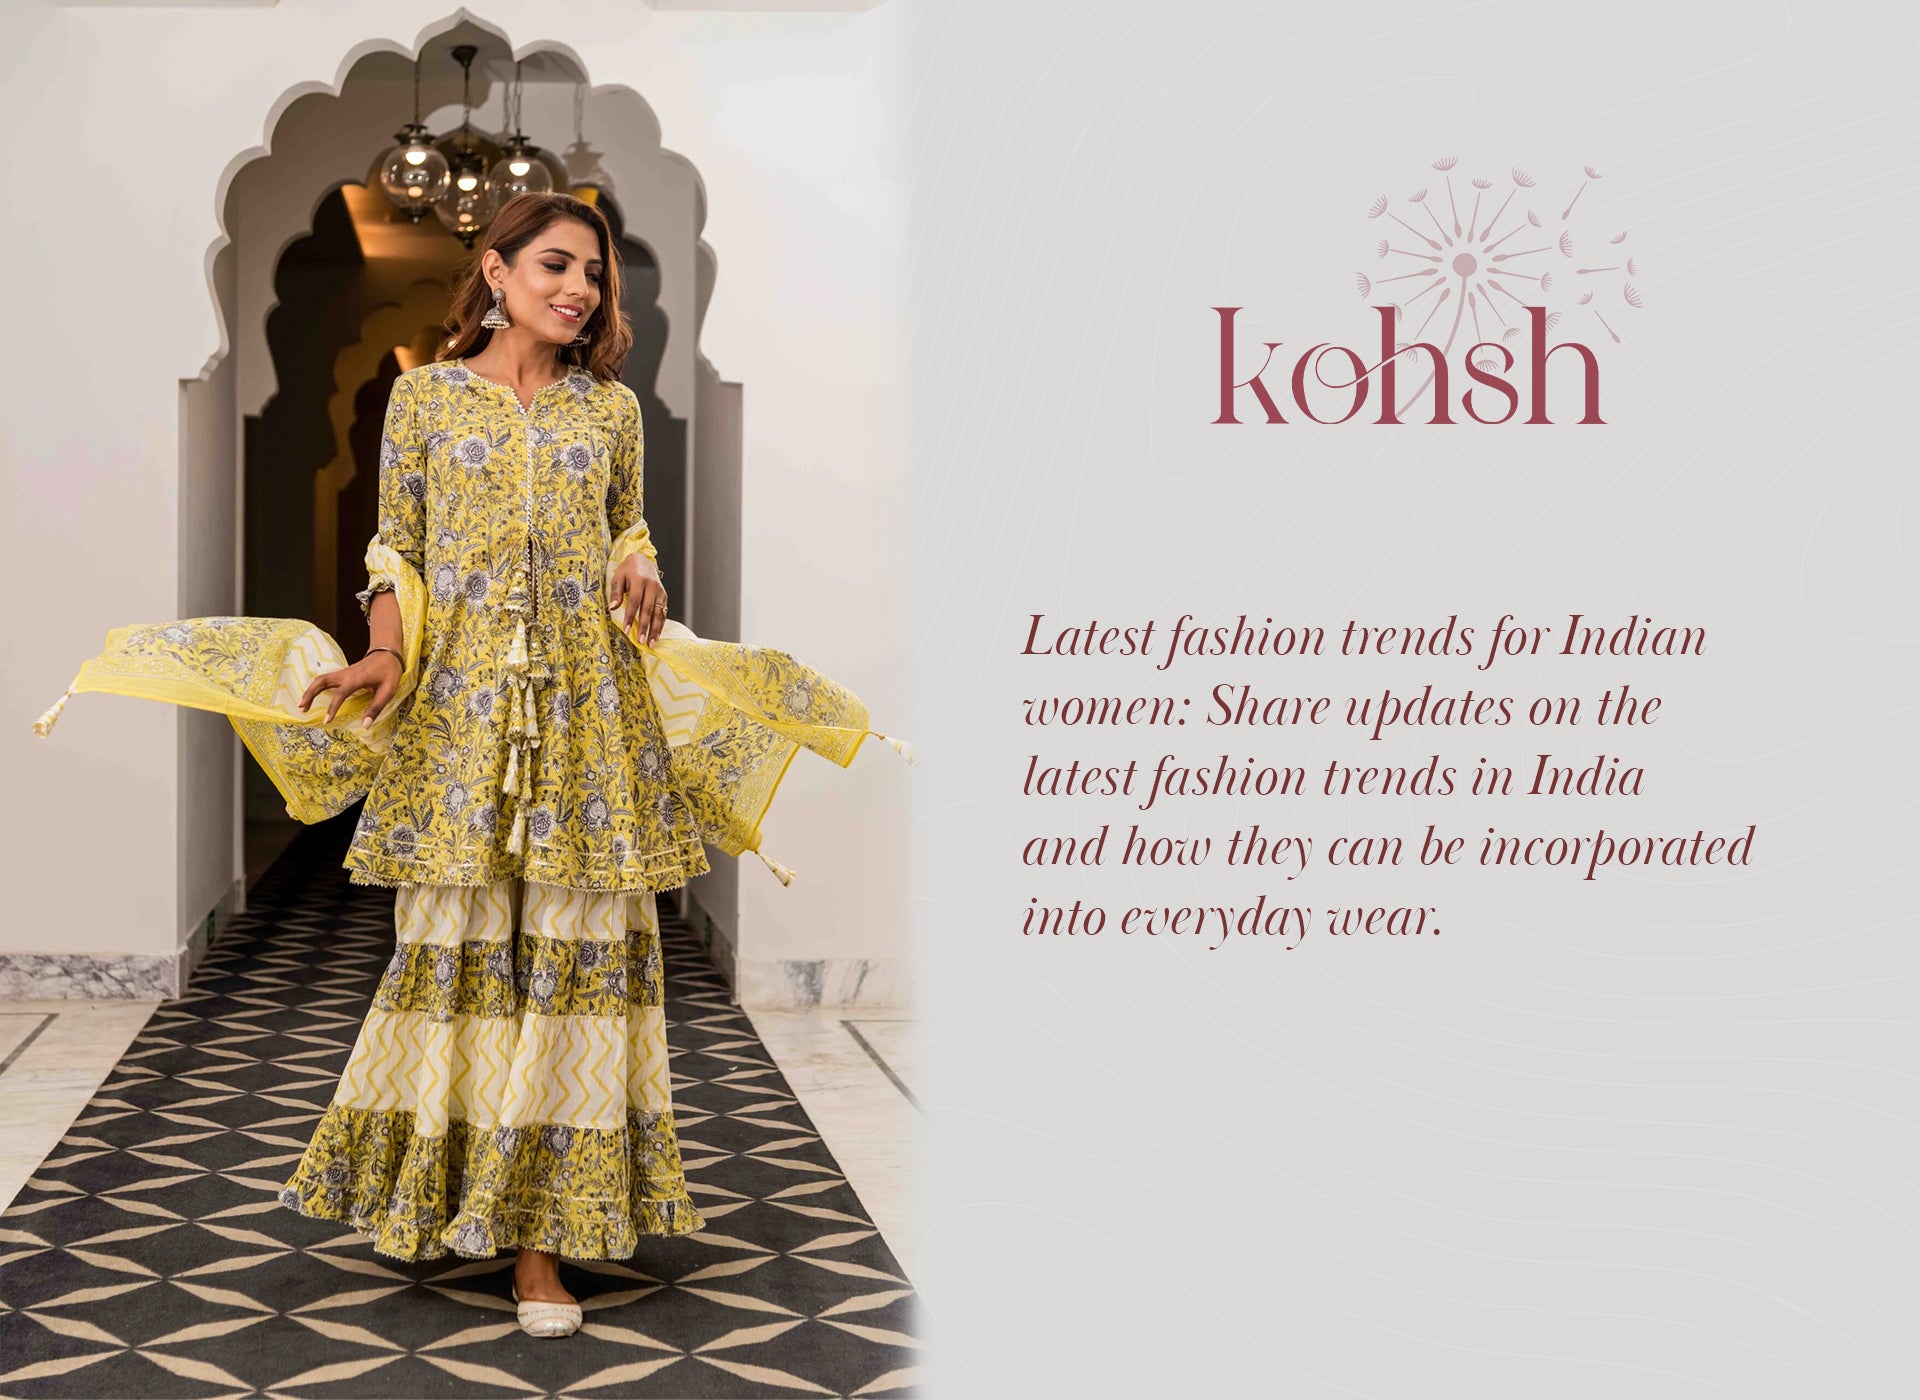 Latest fashion trends for Indian women | Kohsh